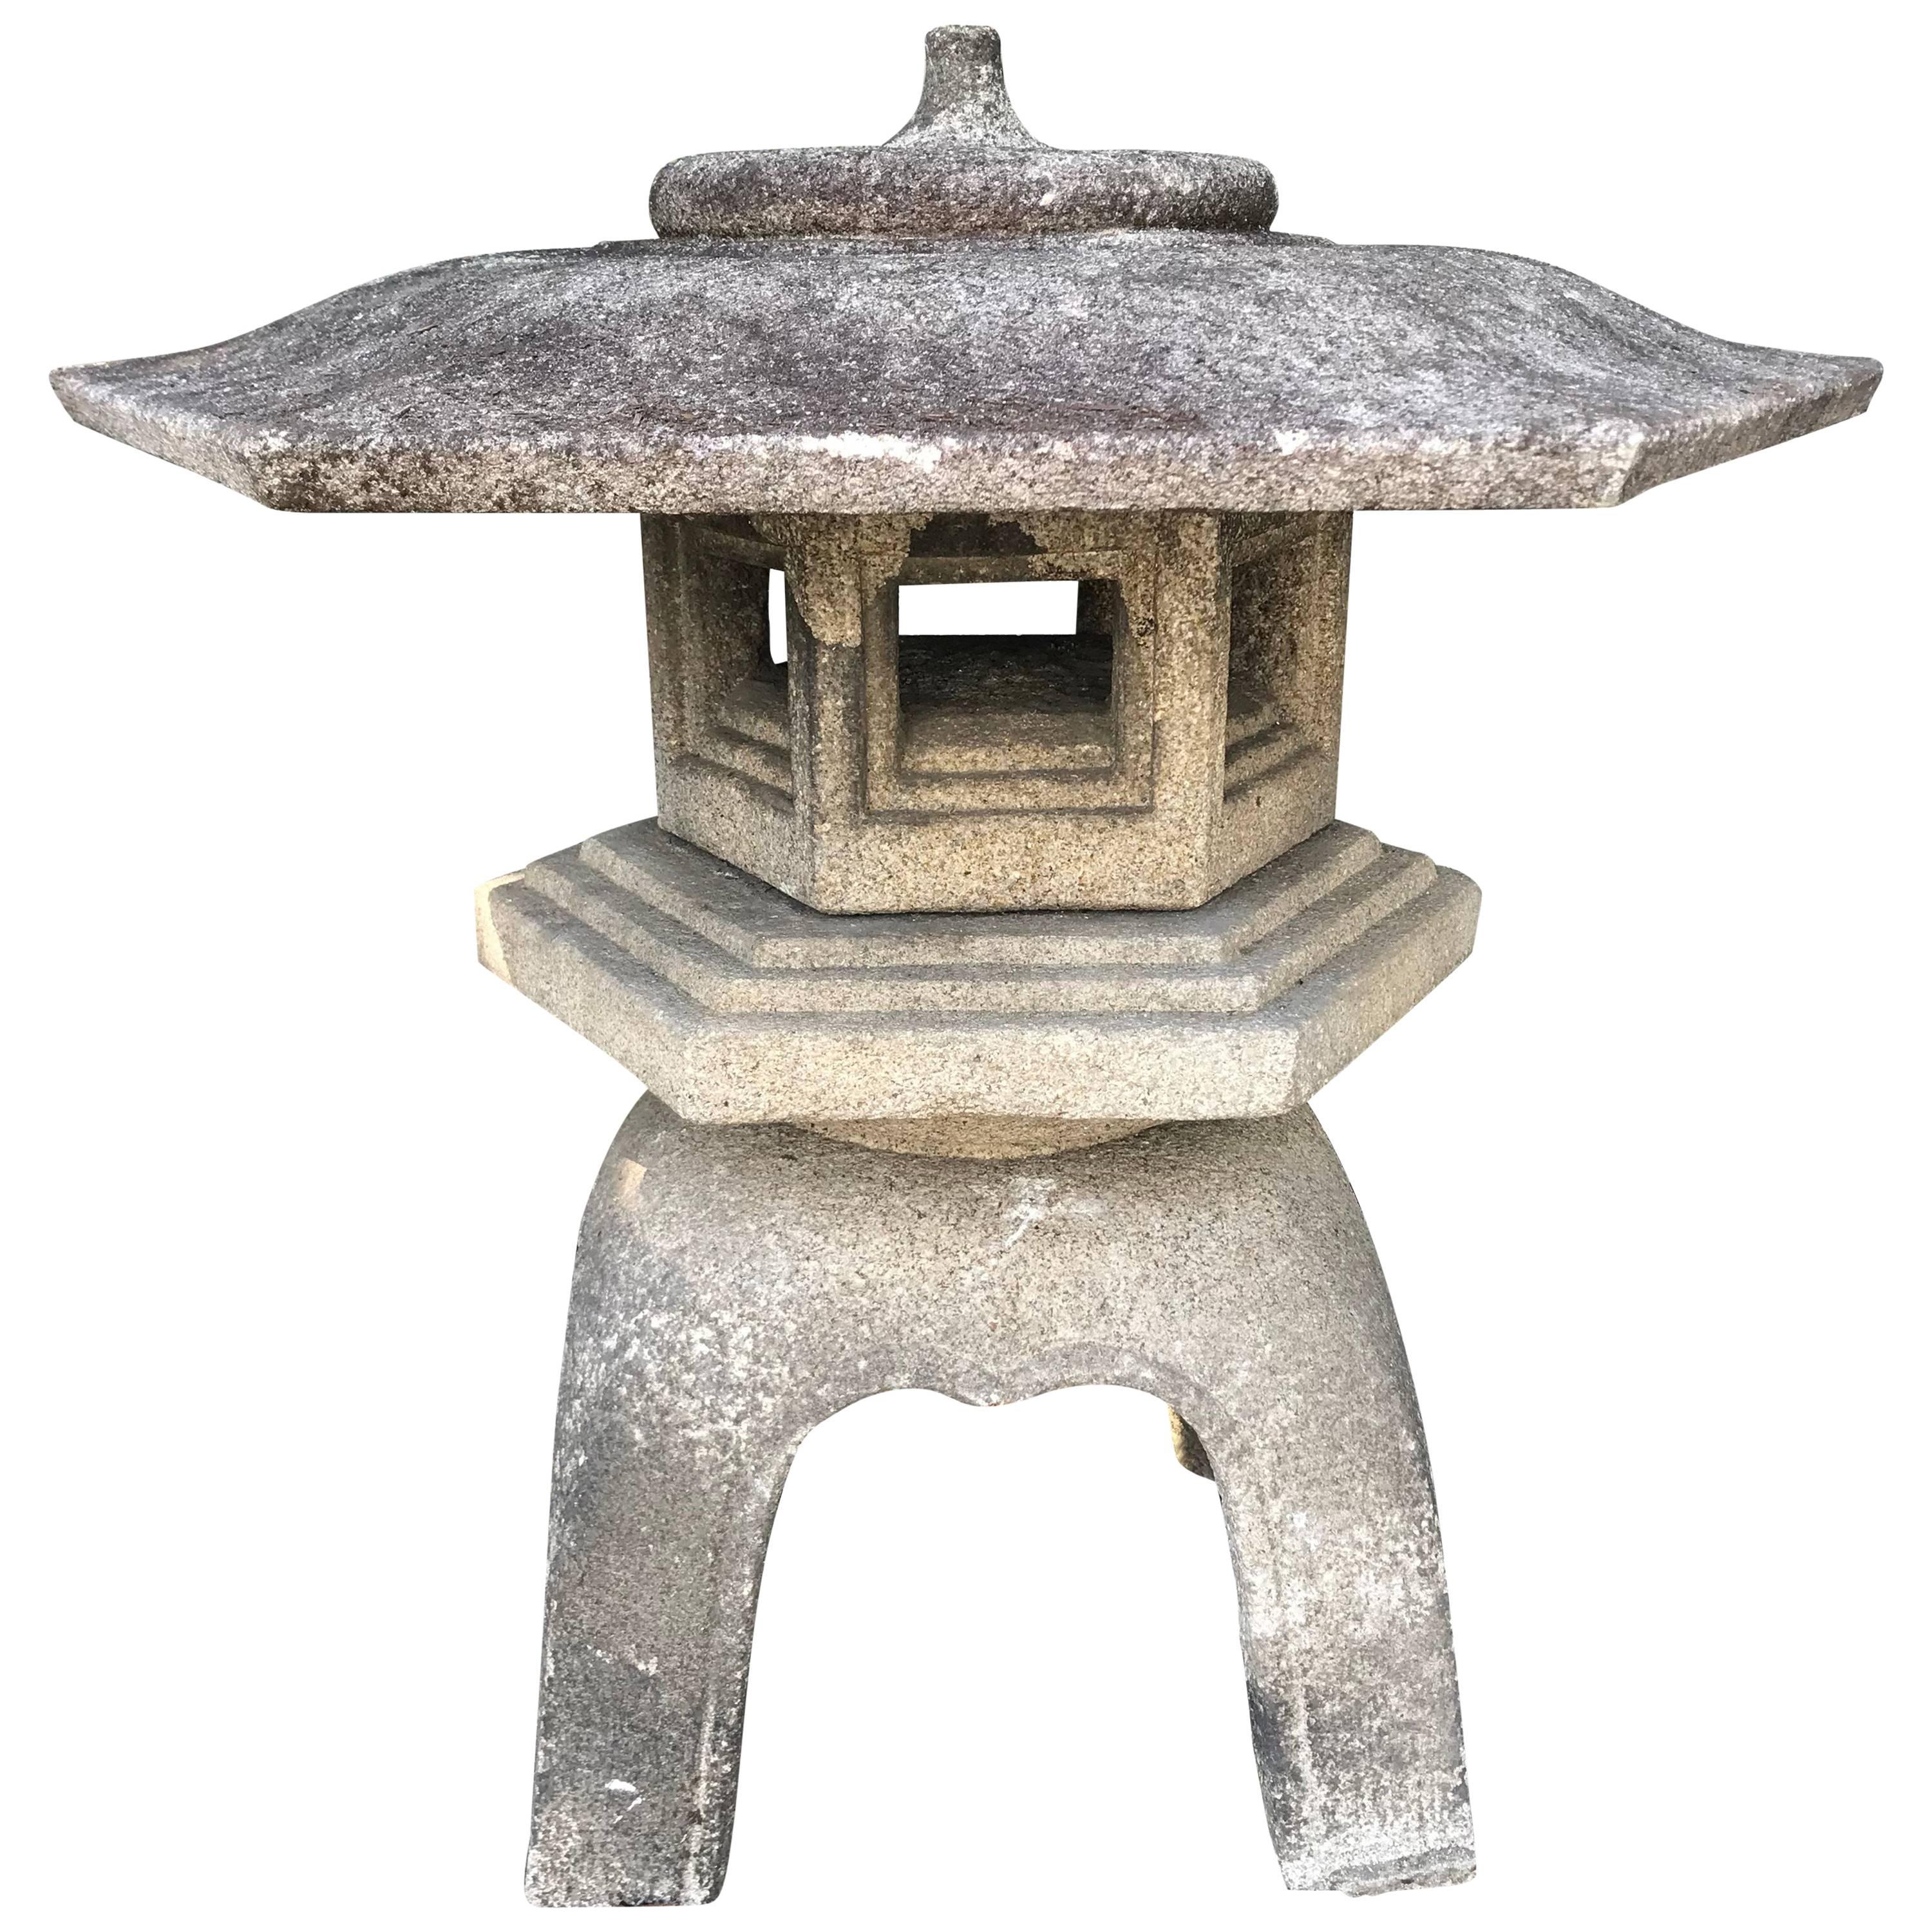 Japan Antique Stone Lantern "Yukimi" Hand-Carved Classic Water and Snow